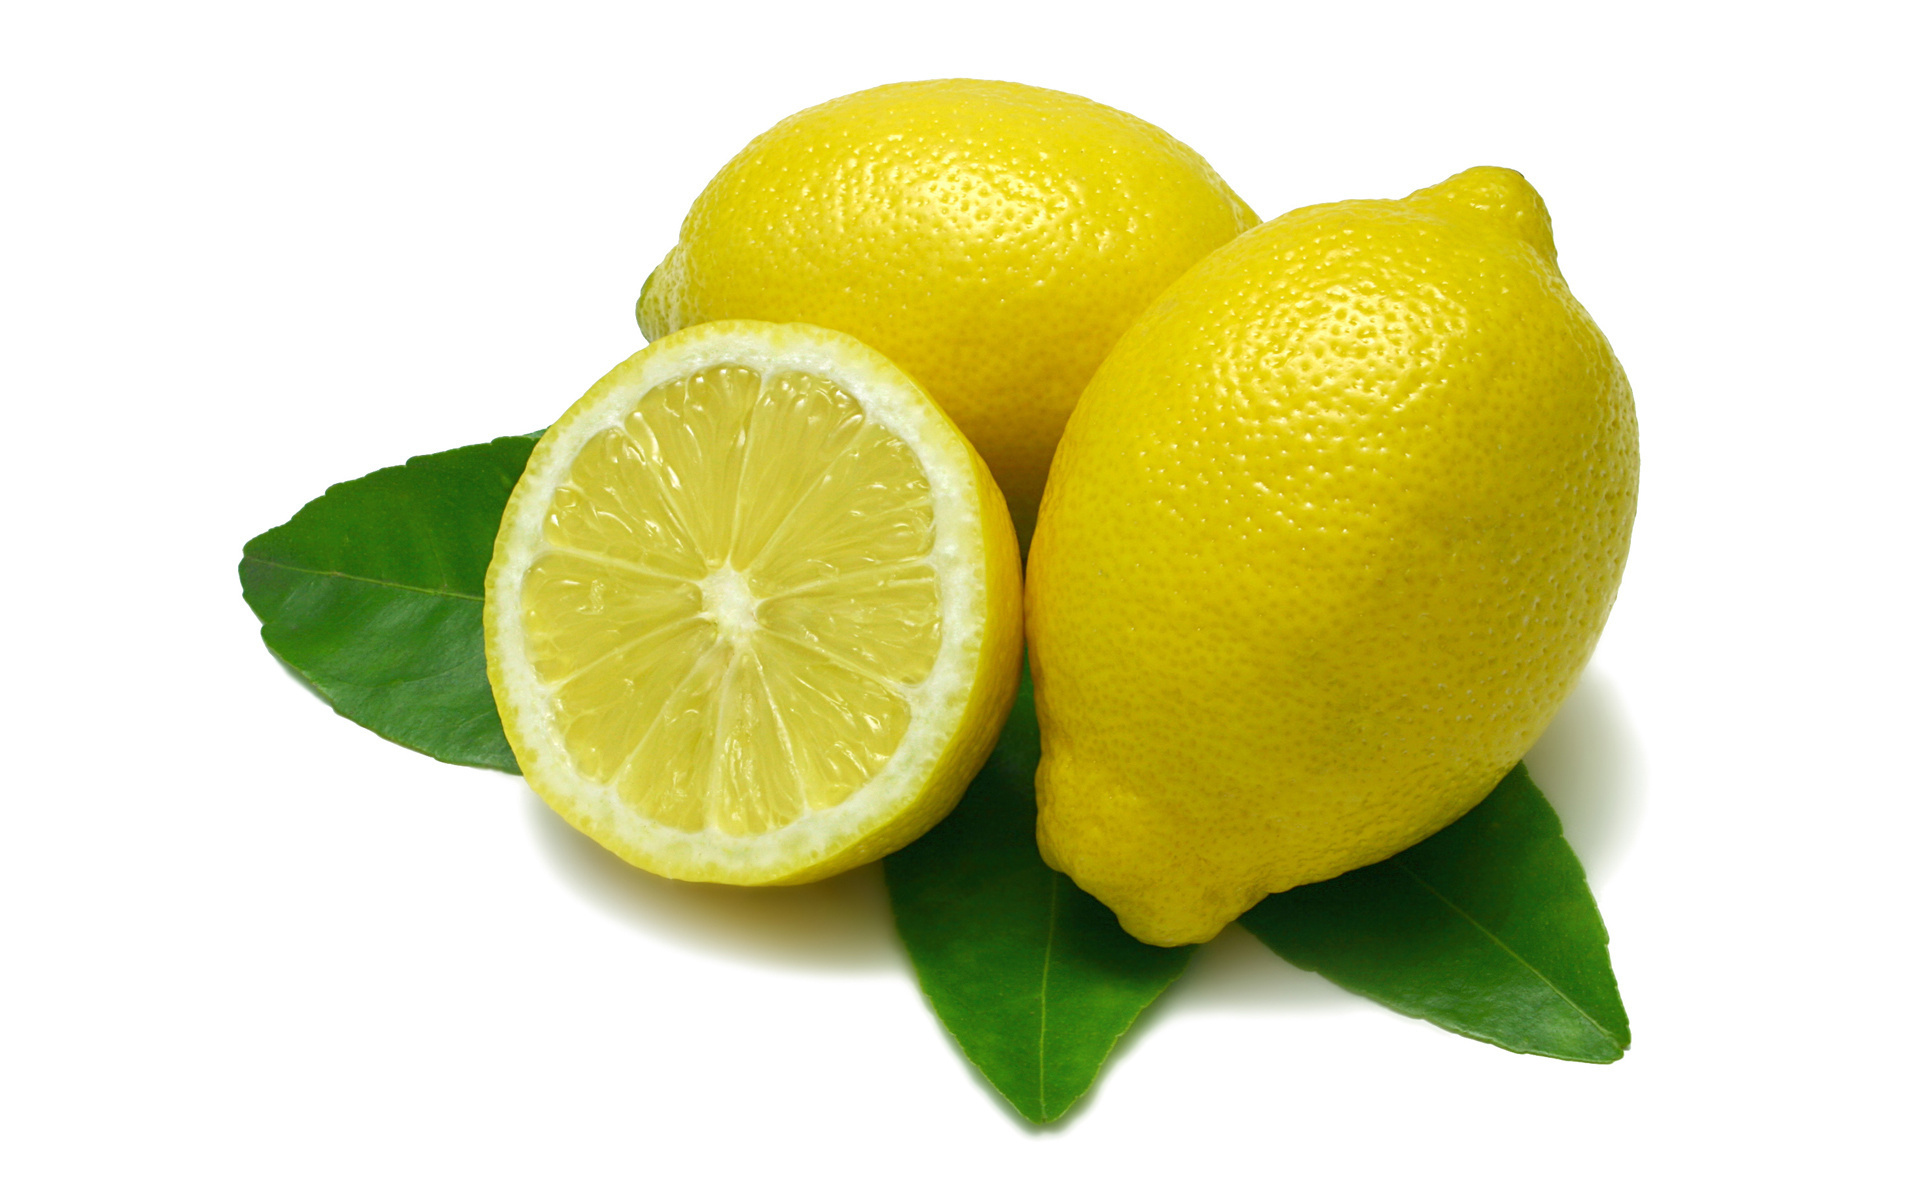 limone wallpaper hd,lime,calce chiave,limone,agrume,limone dolce